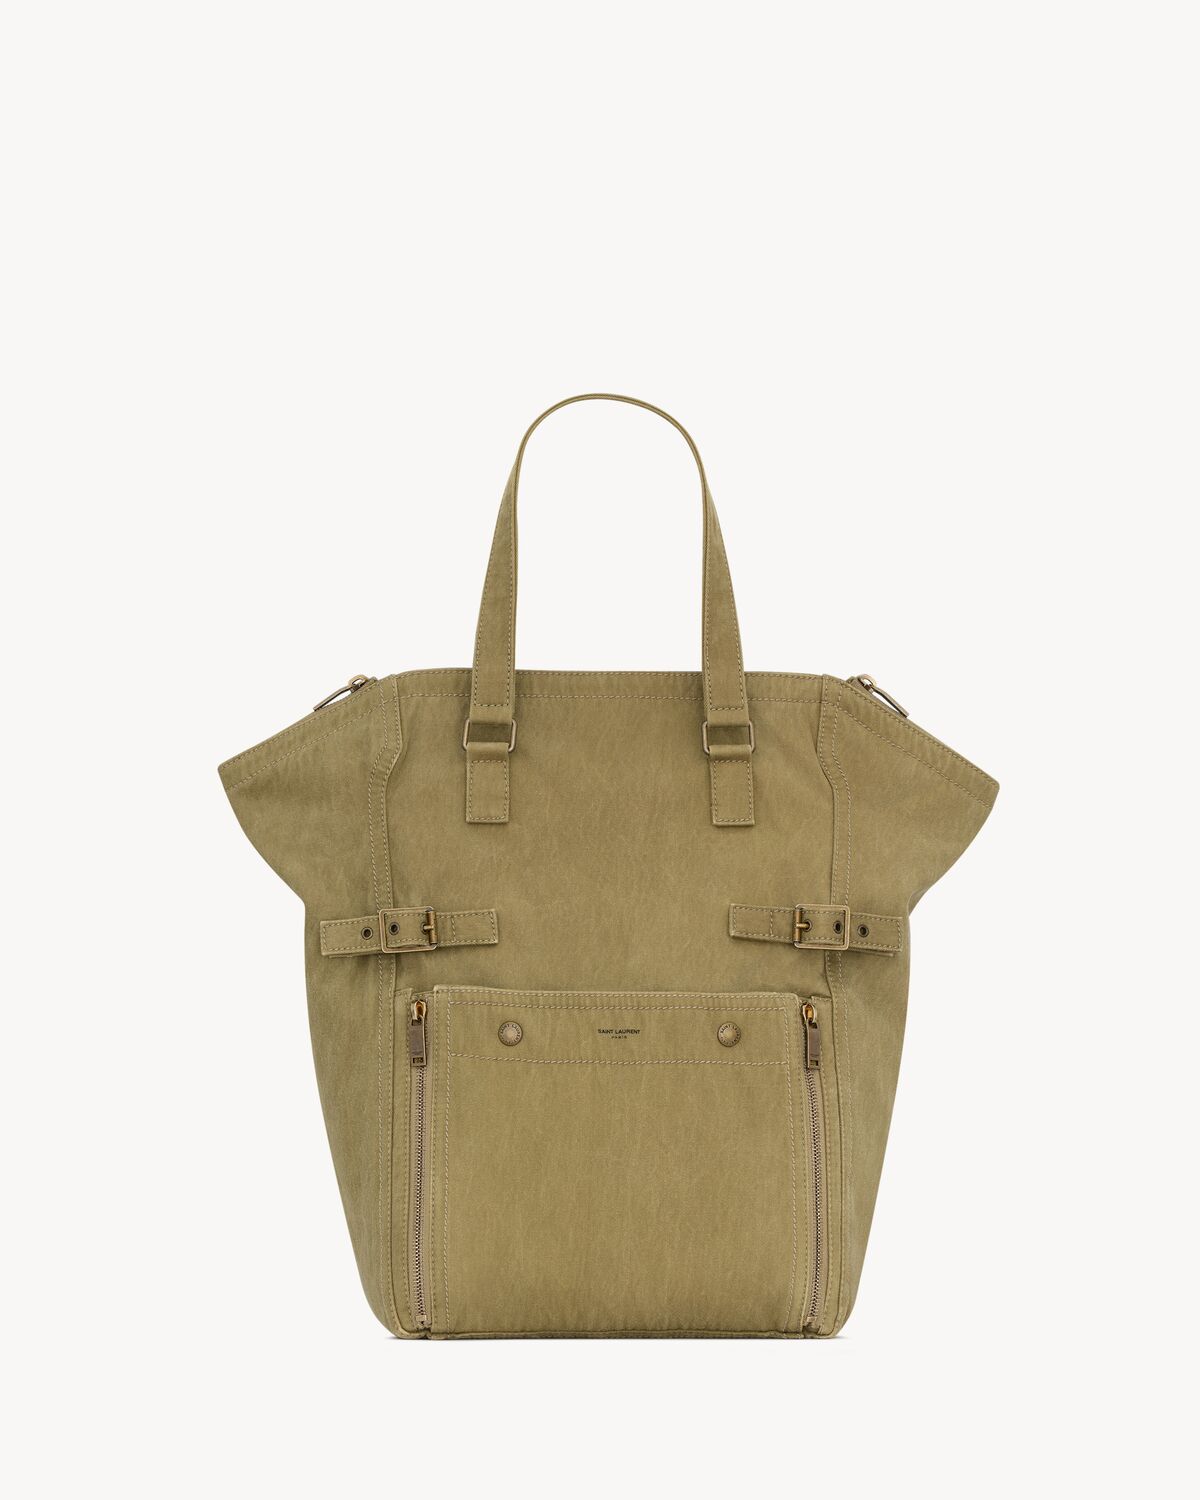 DOWNTOWN TOTE BAG IN CANVAS